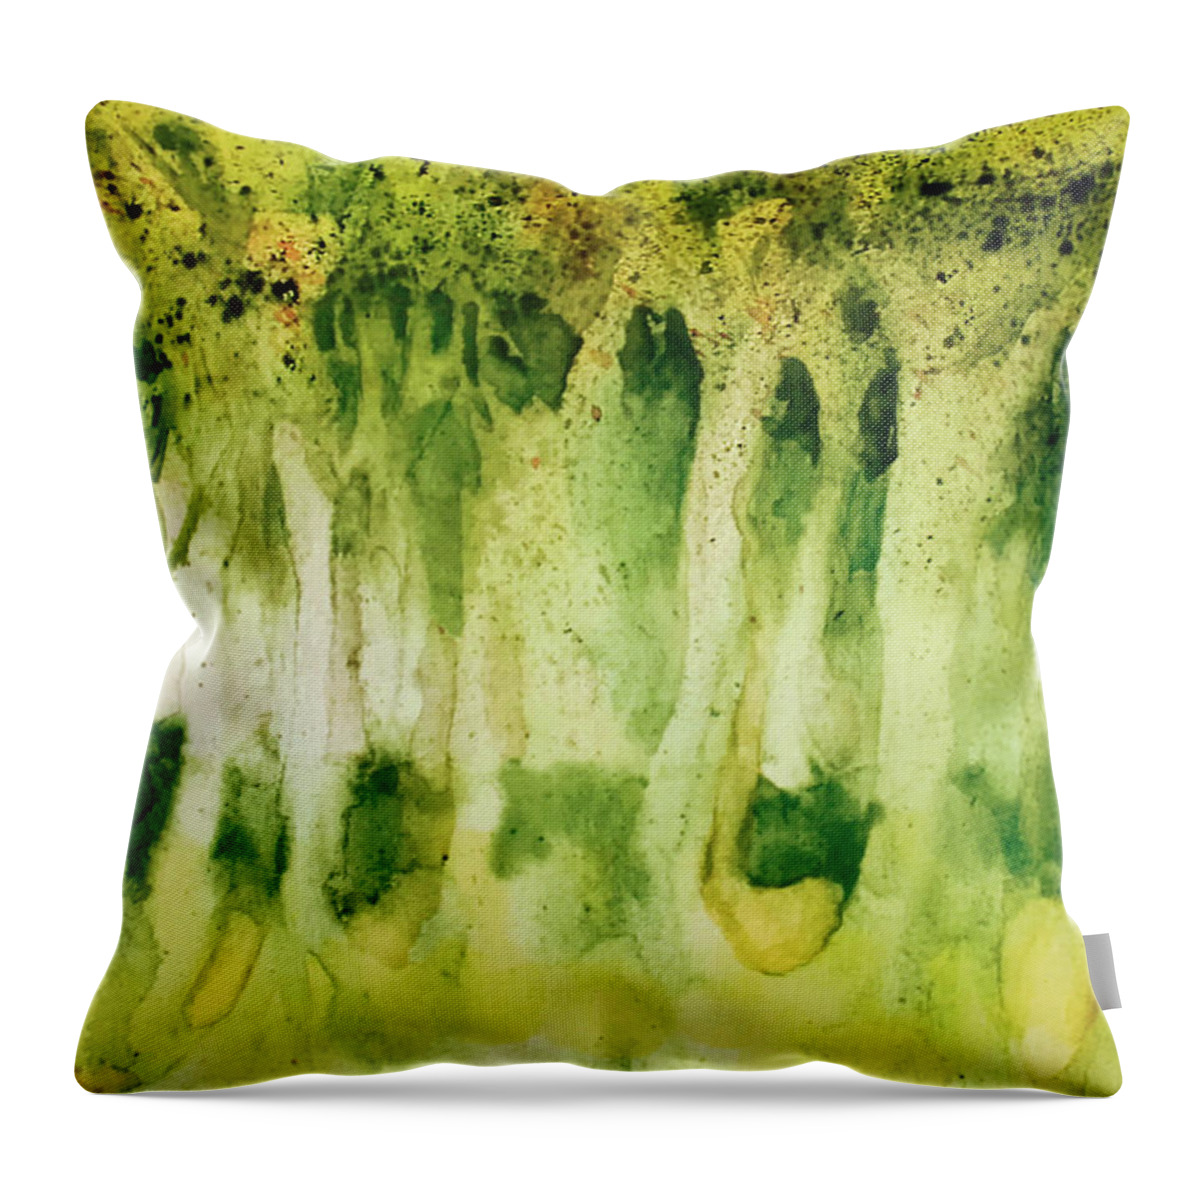 Watercolor Throw Pillow featuring the painting Summer Rain by Judy Frisk